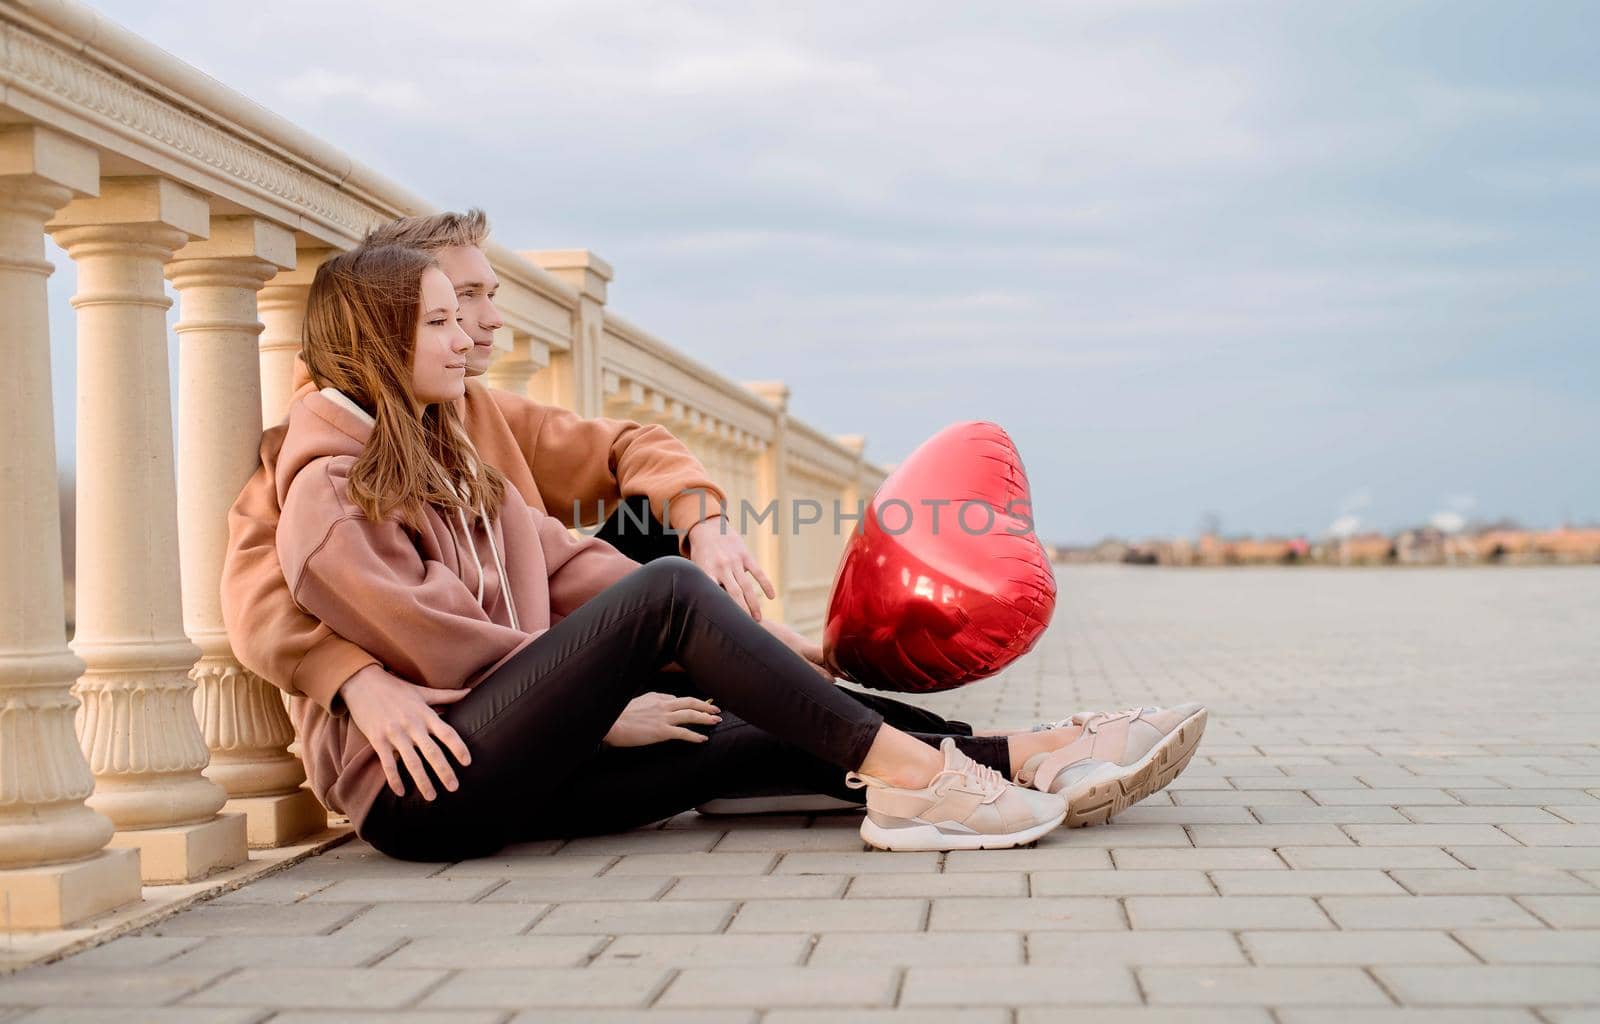 Happy young loving couple embracing each other outdoors in the park having fun holding red balloons